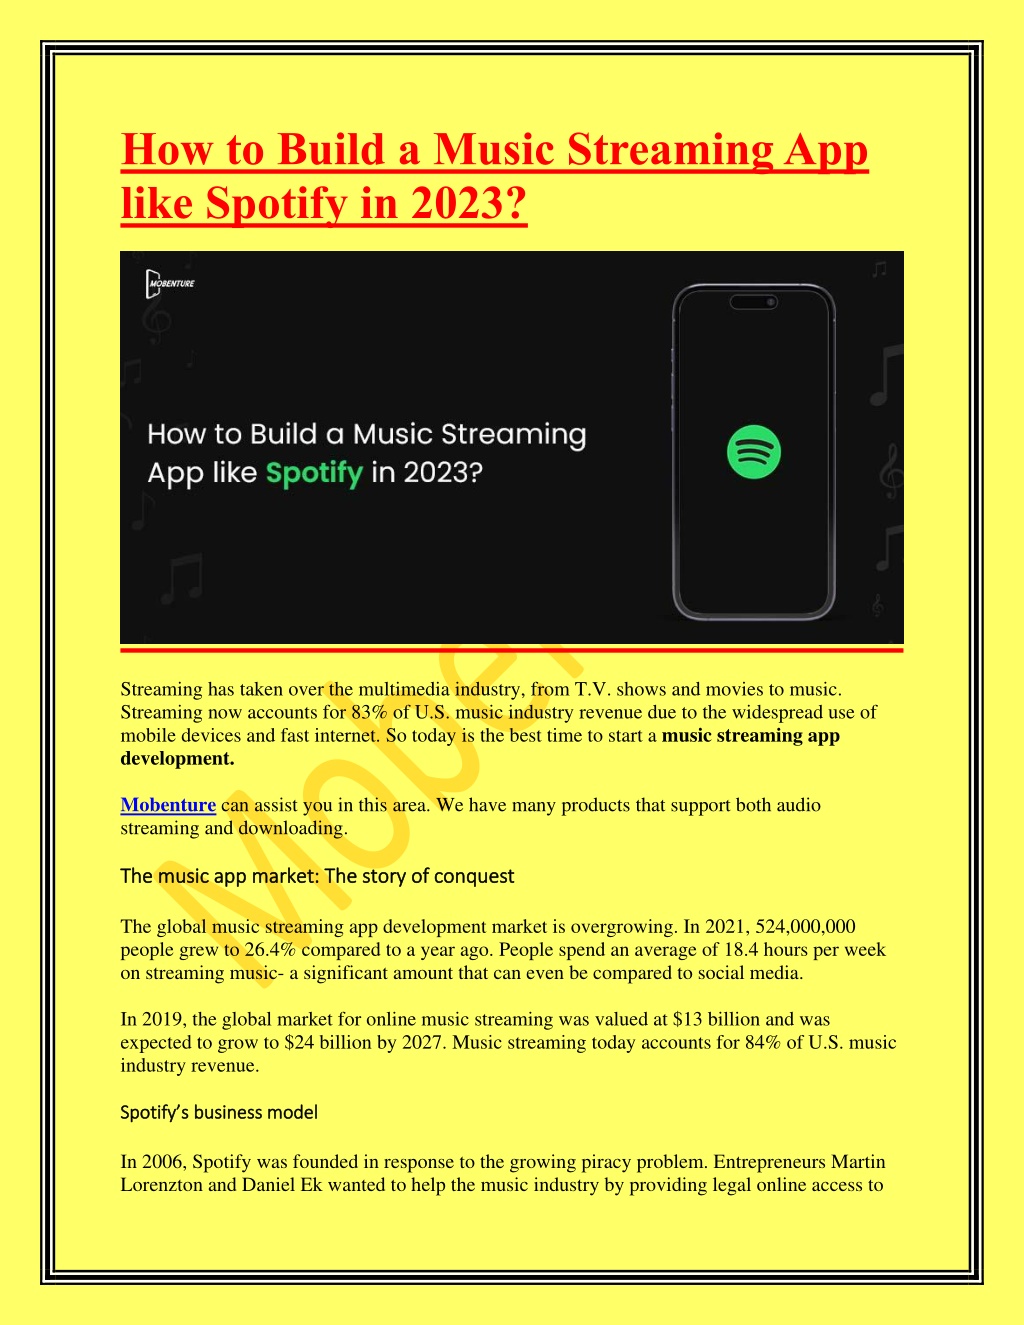 Top Tips For Spotify - Digital Marketing Trends